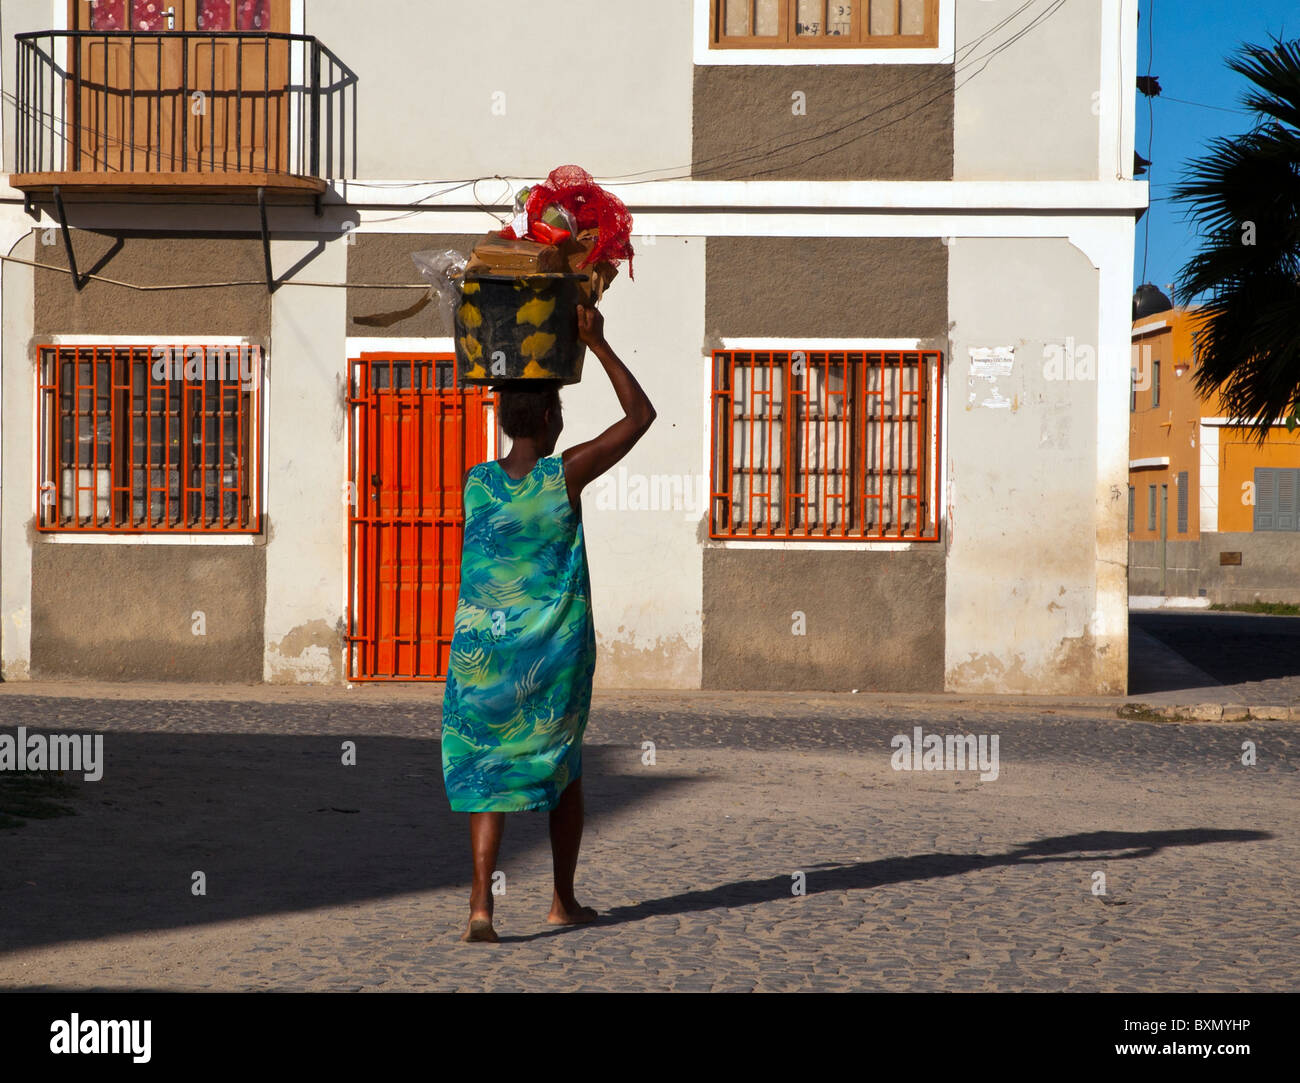 Woman carrying a basket on her head, Sal Rei, Boa Vista, Cape Verde Stock Photo